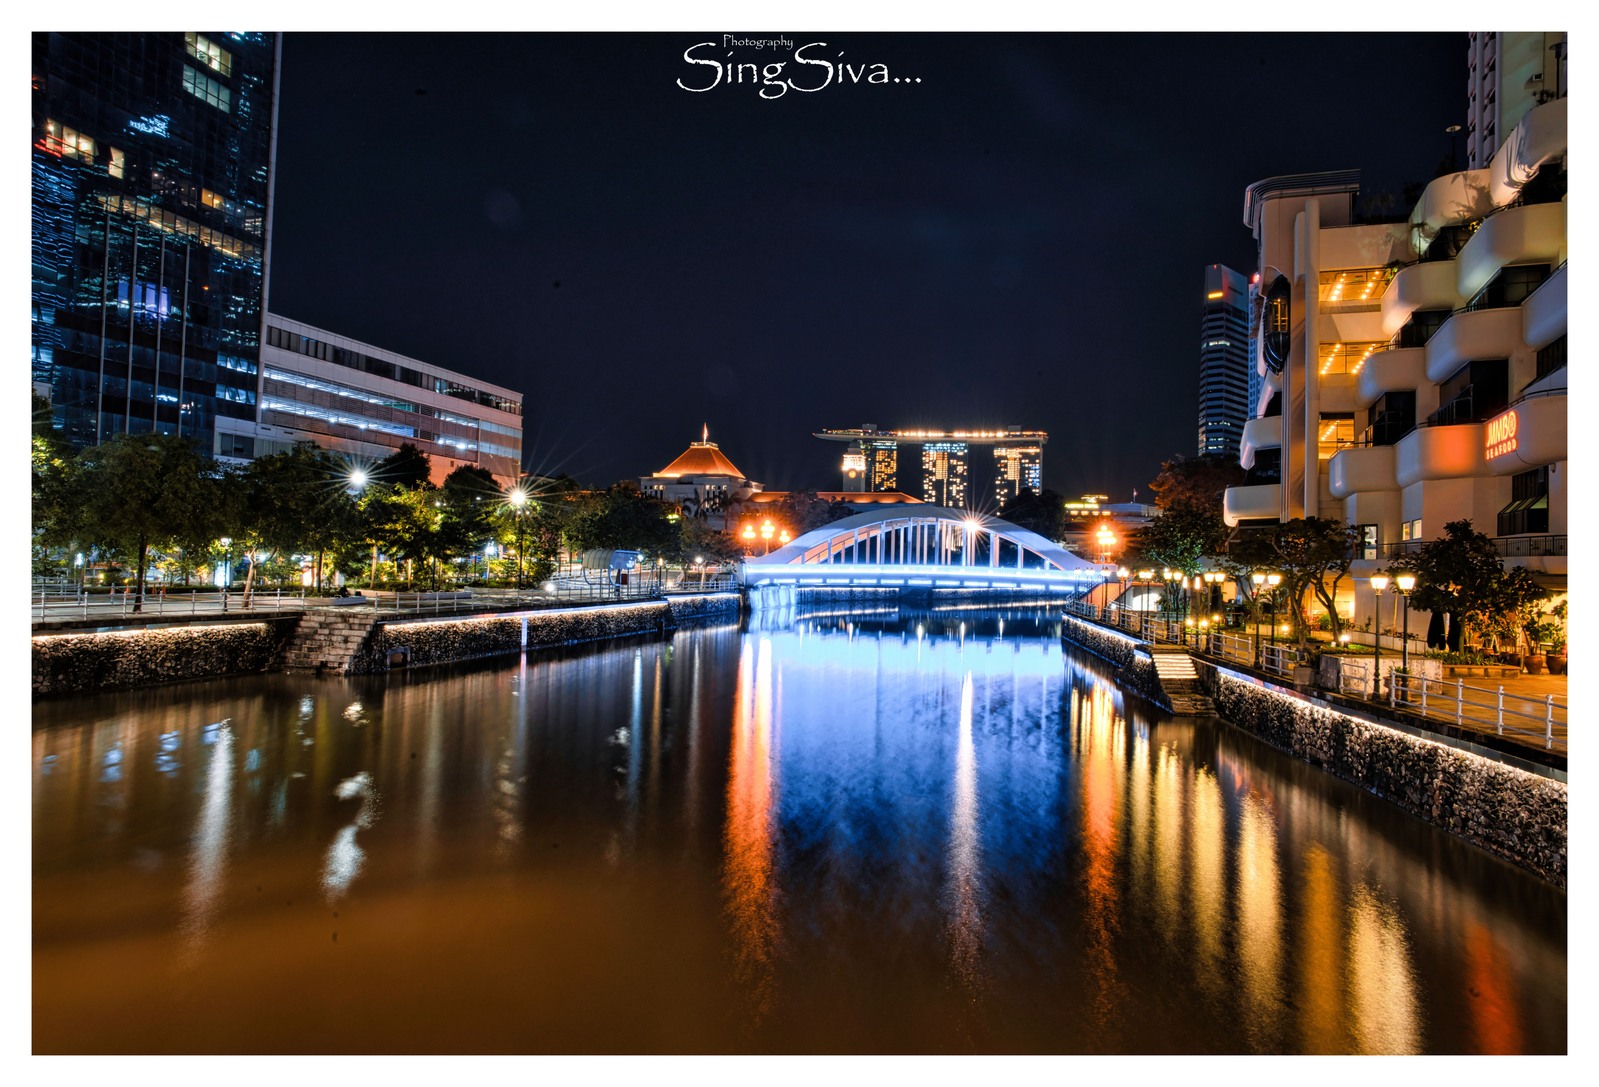 Image of Clarke Quay by sing siva